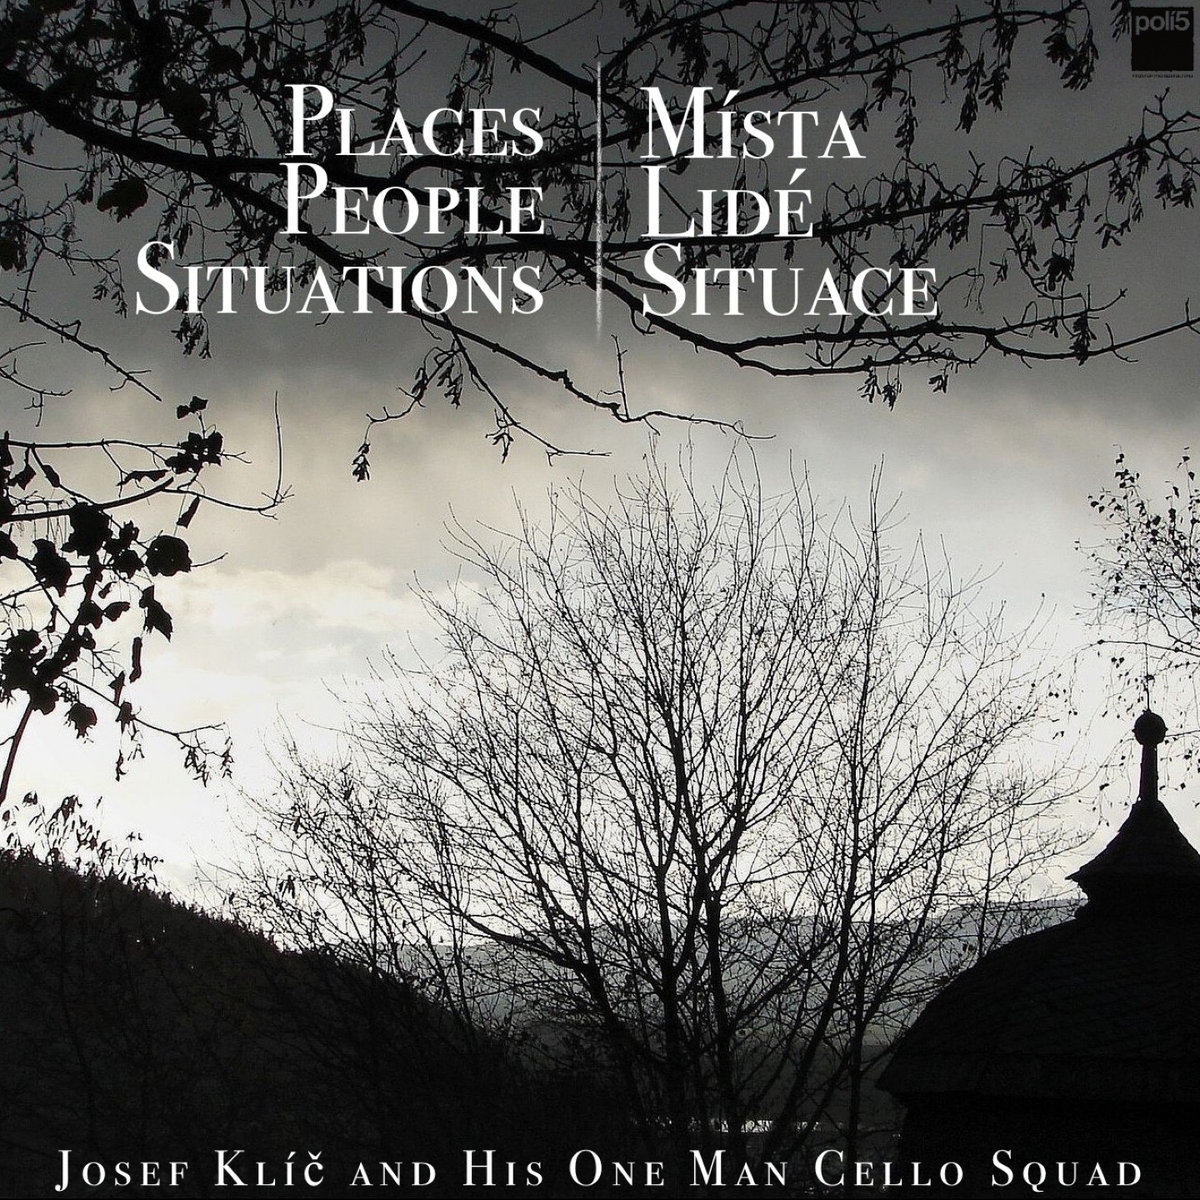 JOSEF KLÍČ AND HIS ONE MAN CELLO SQUAD: Places, People, Situations